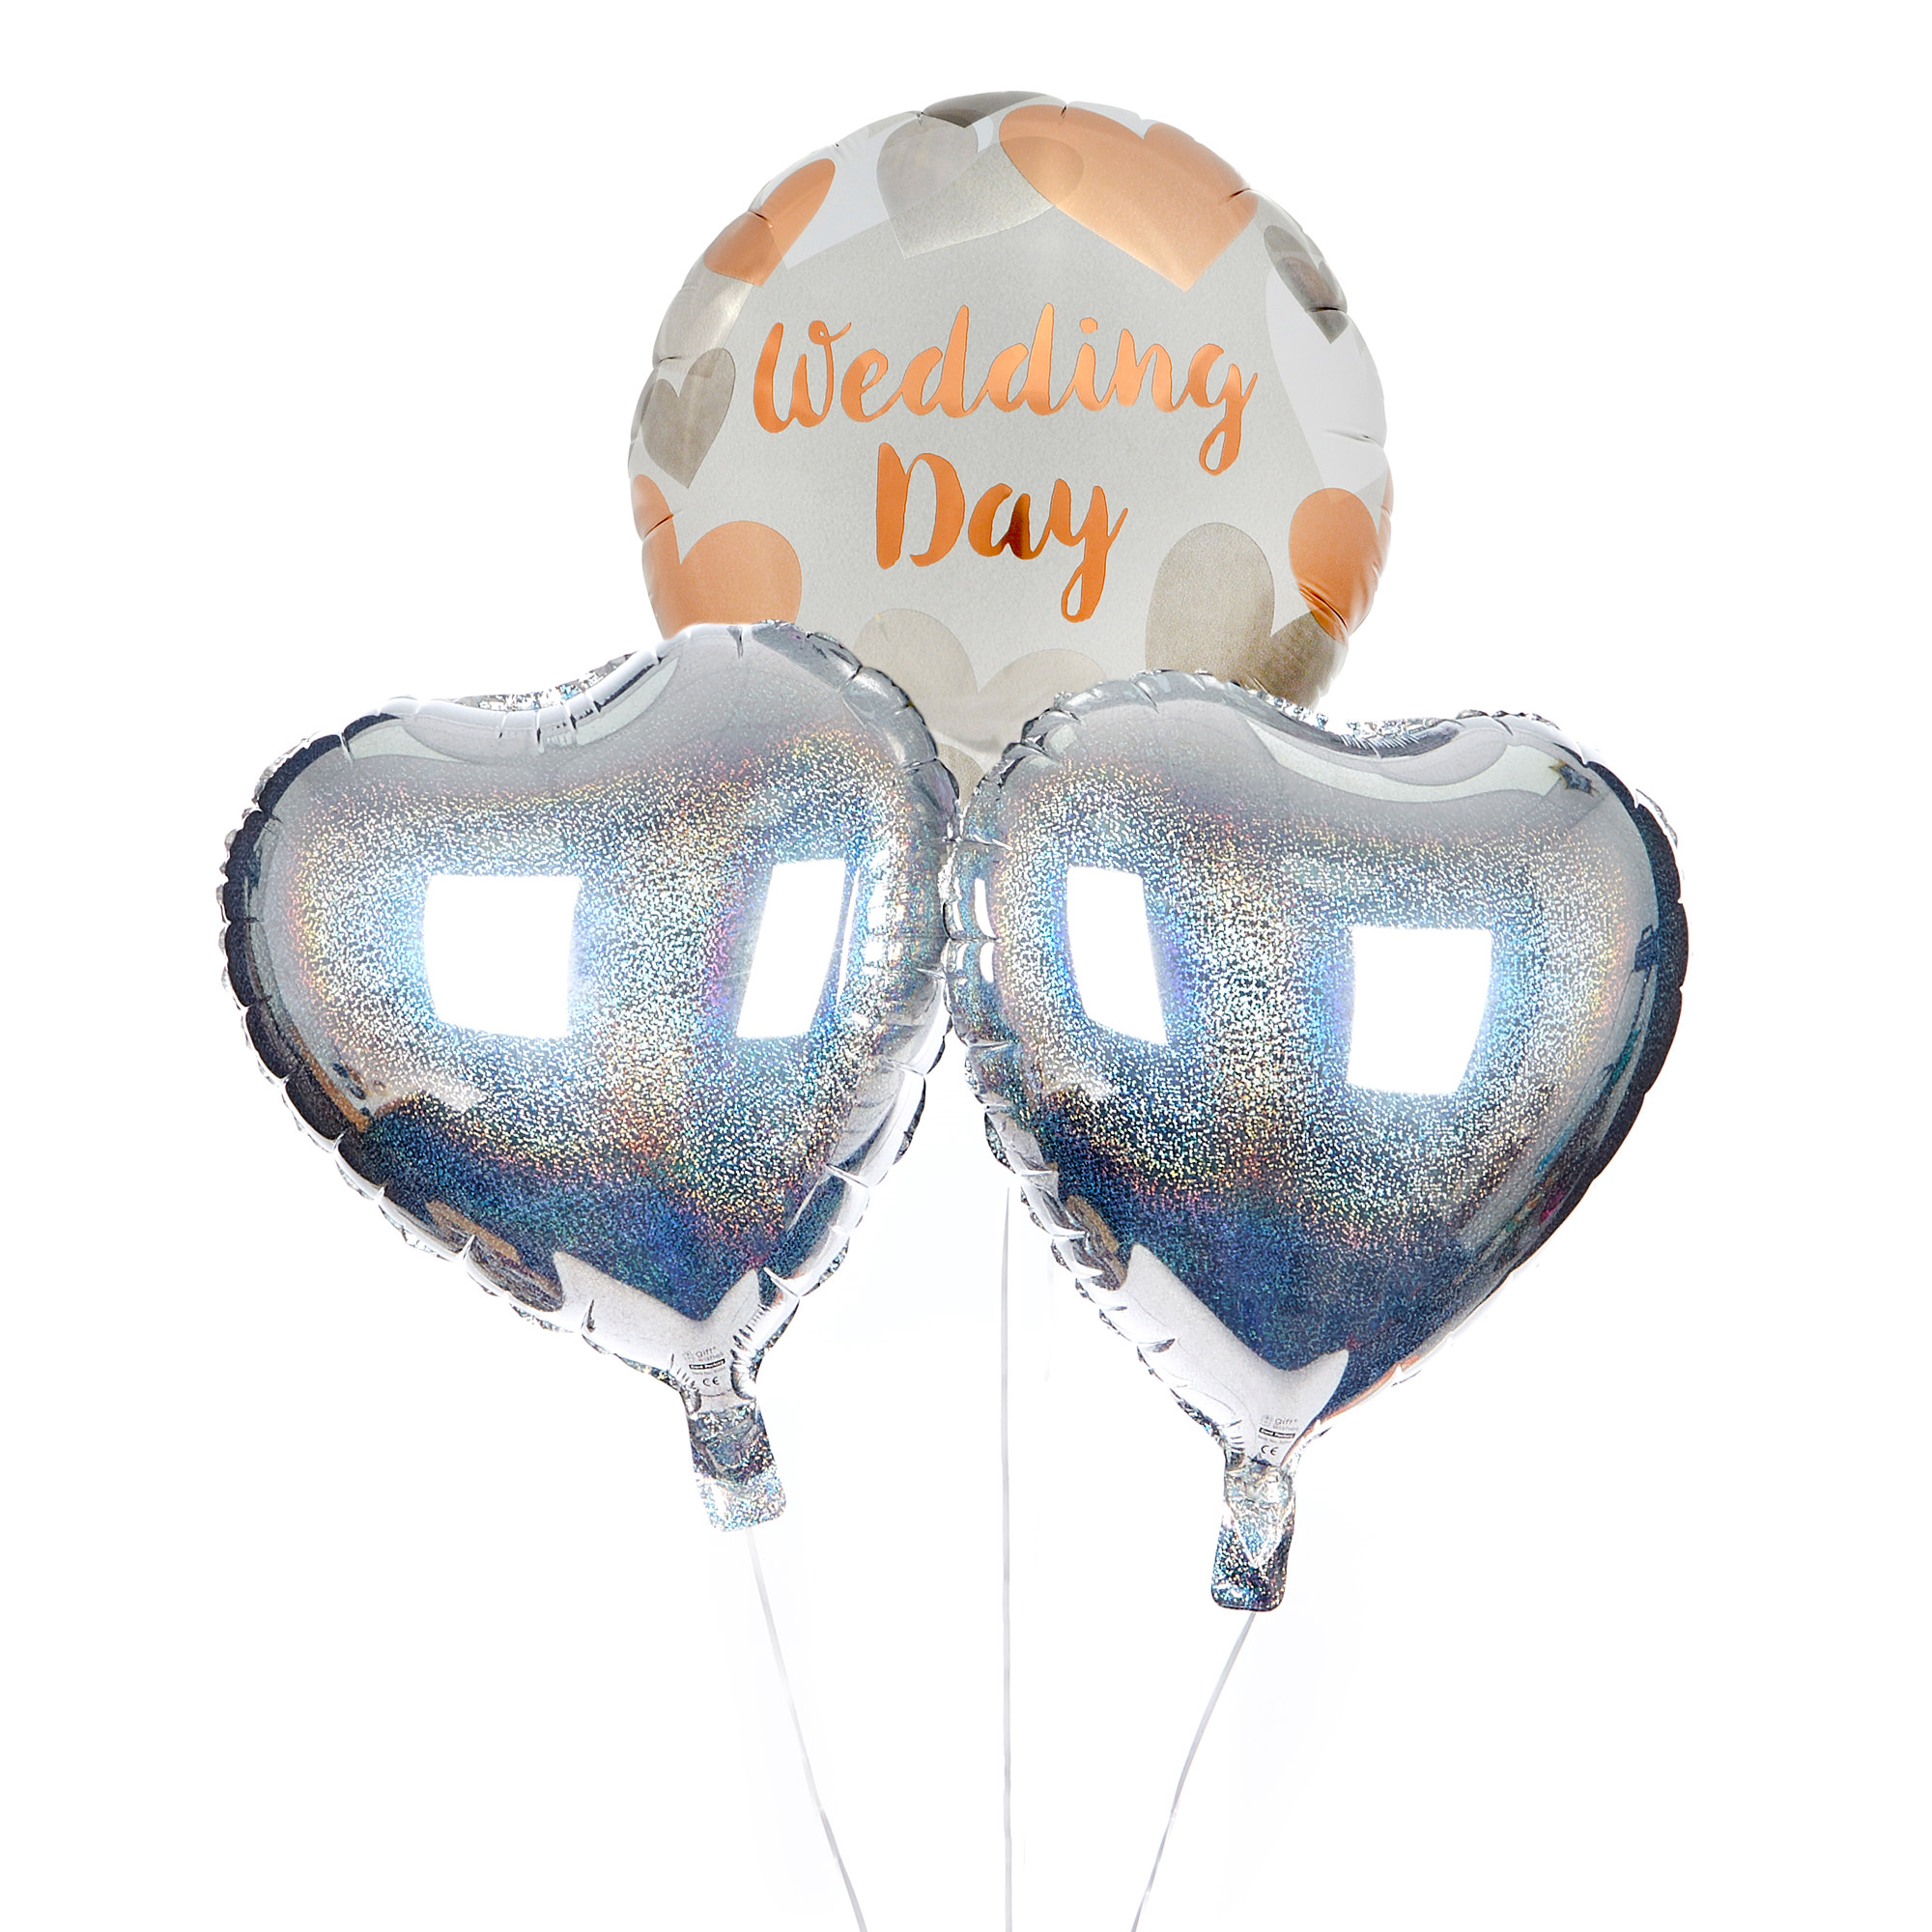 Wedding Day Balloon Bouquet - DELIVERED INFLATED!